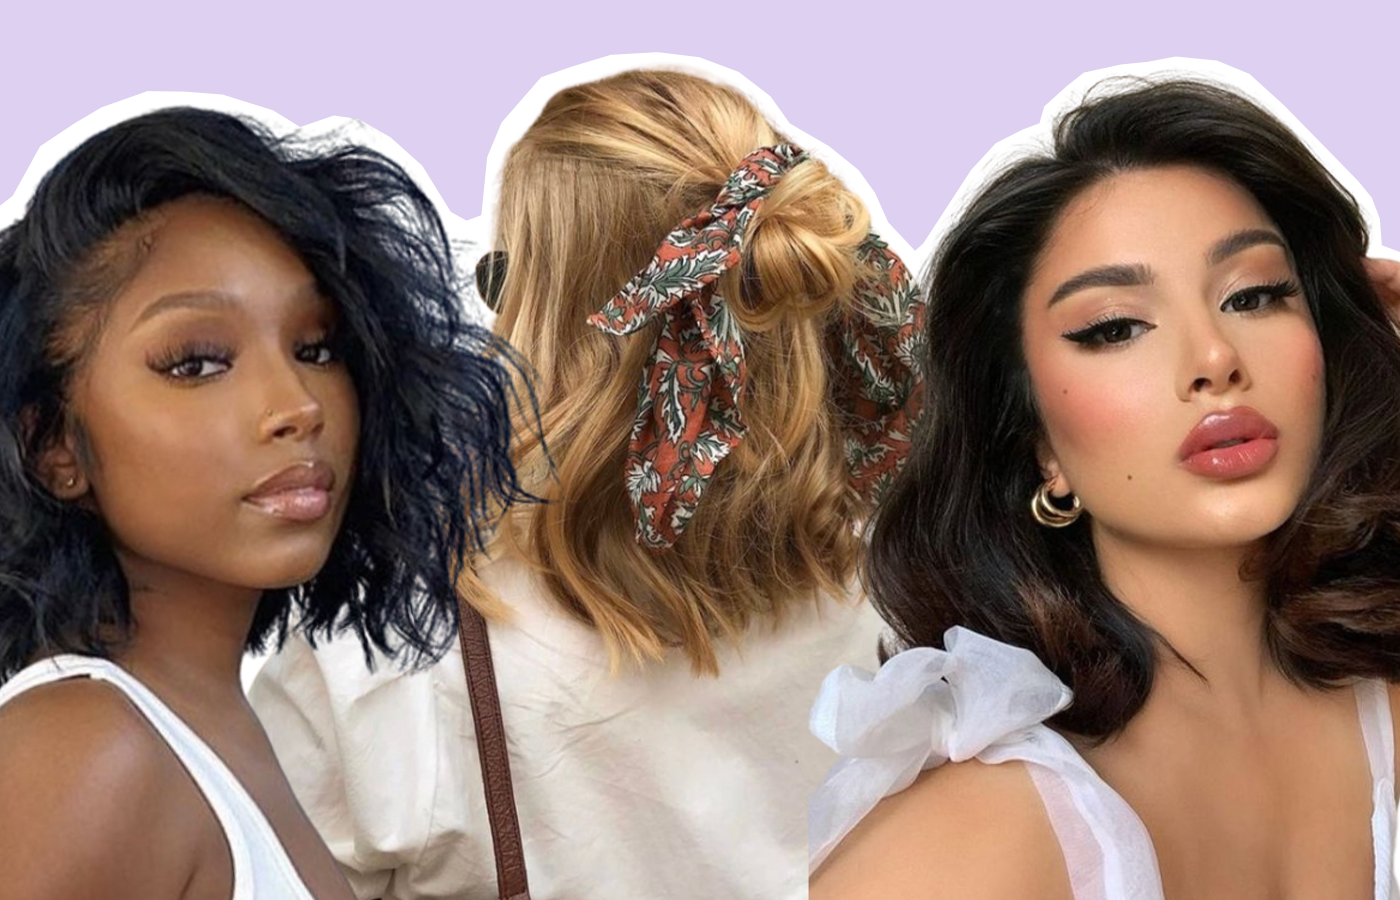 5 Irresistible Halo-Friendly Hairstyles for Short Hair